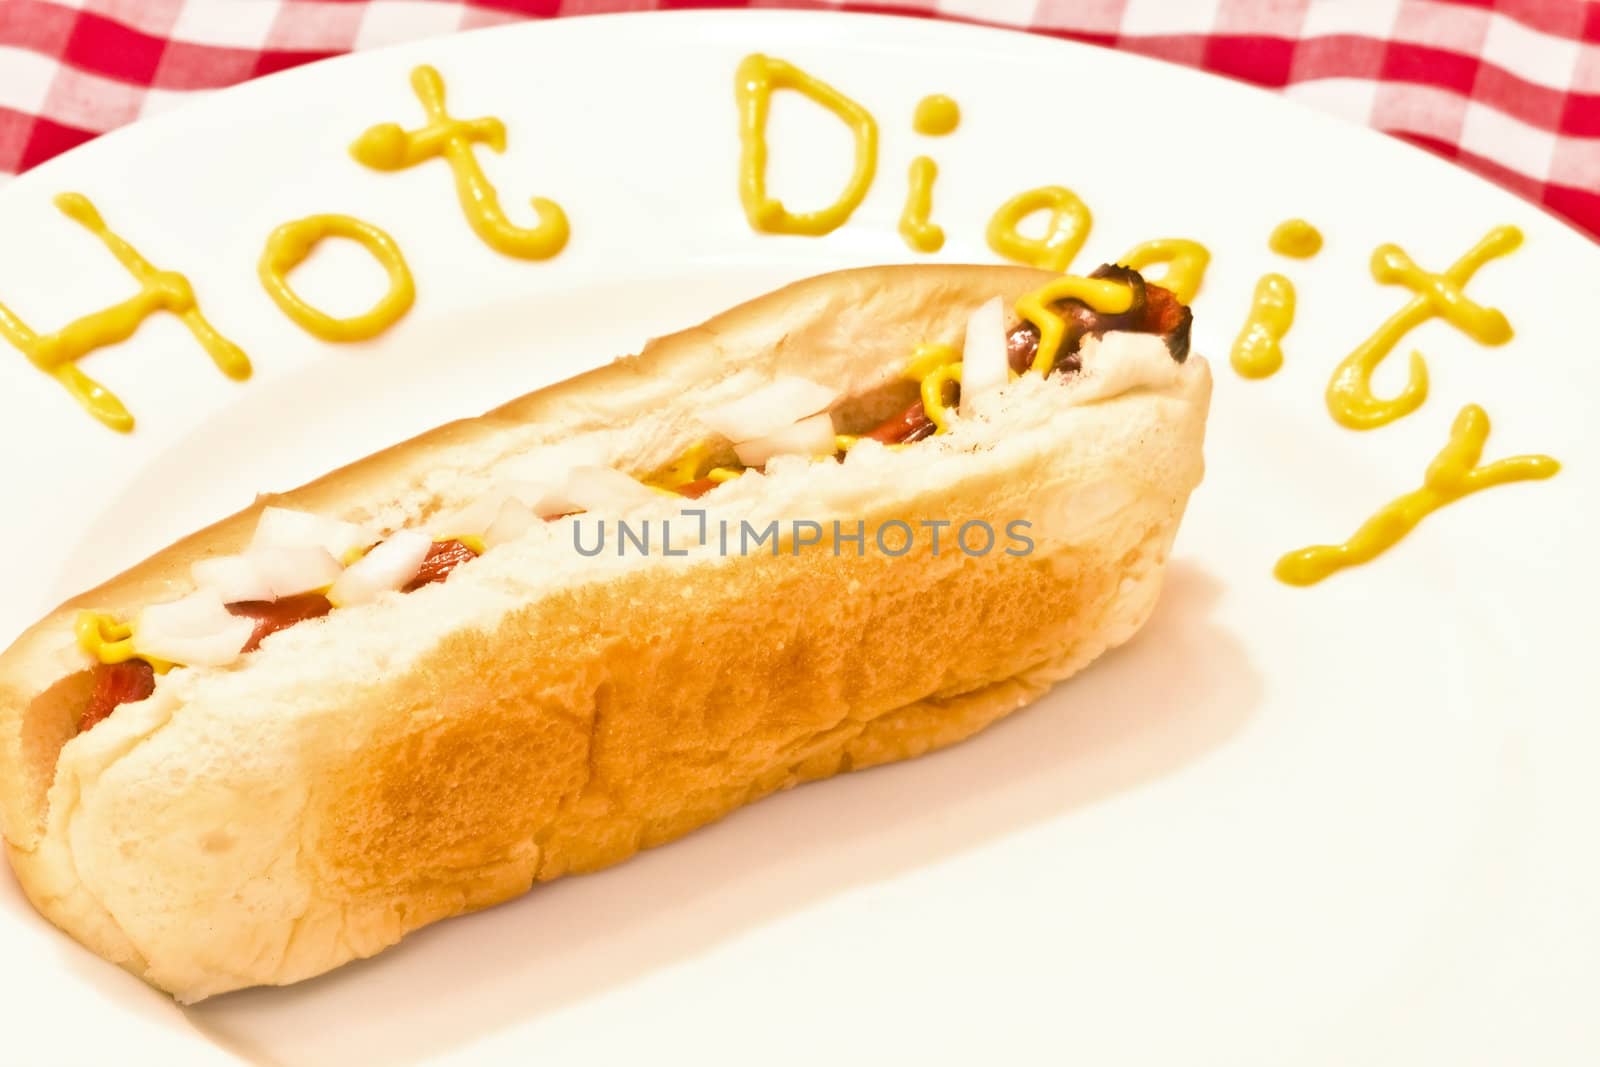 hot dog on a white plate with hot diggity spelled out